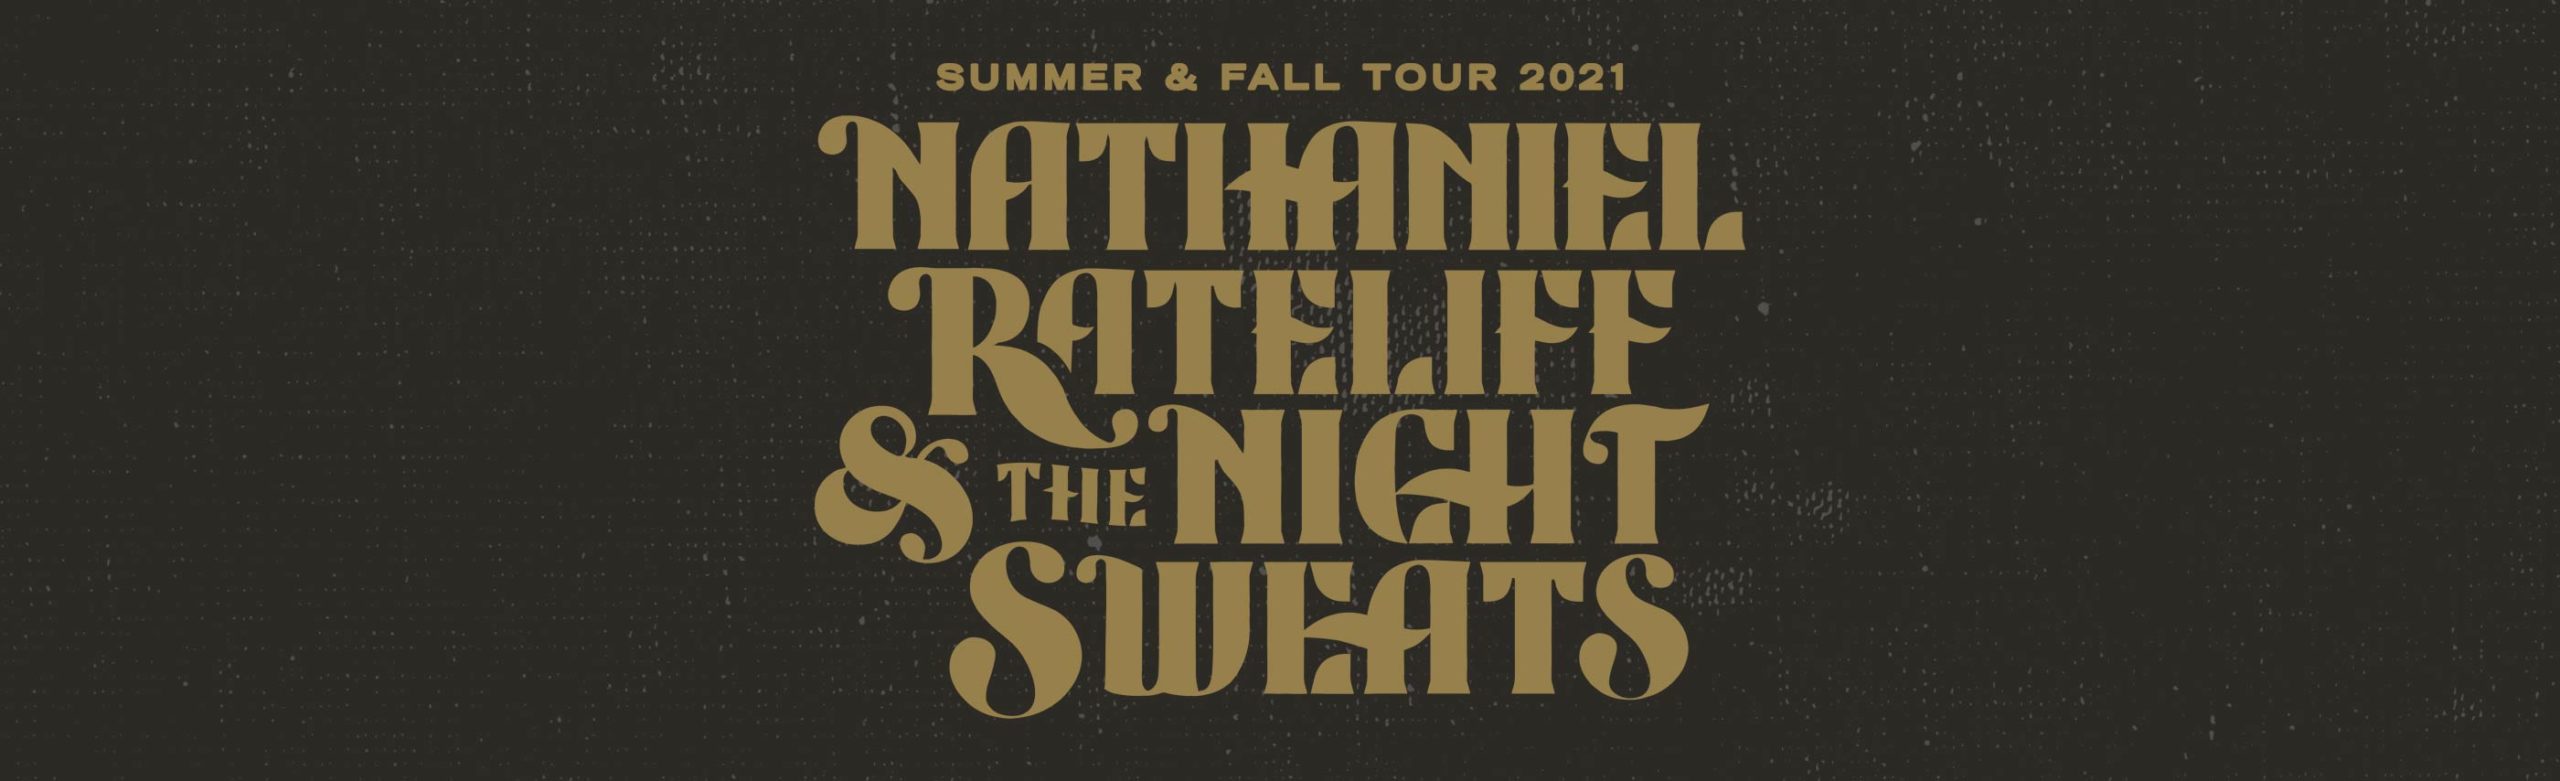 Nathaniel Rateliff and The Night Sweats Will Return to KettleHouse Amphitheater Image